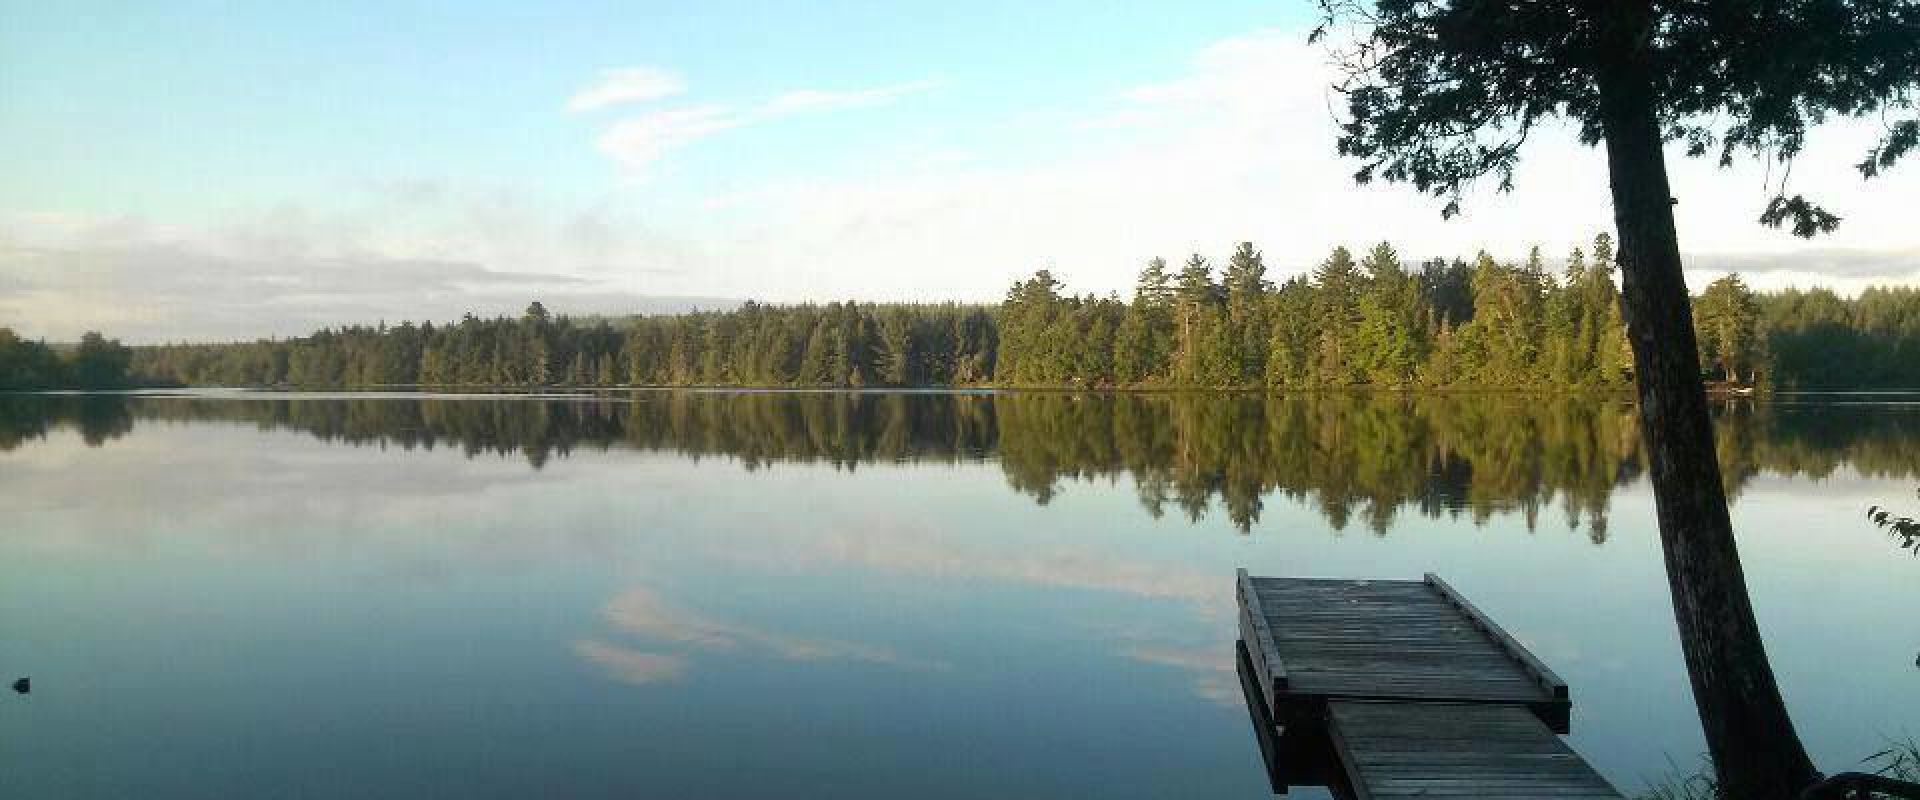 A dock floats on the calm waters of Loon Bay. The water displays a nearly perfect reflection